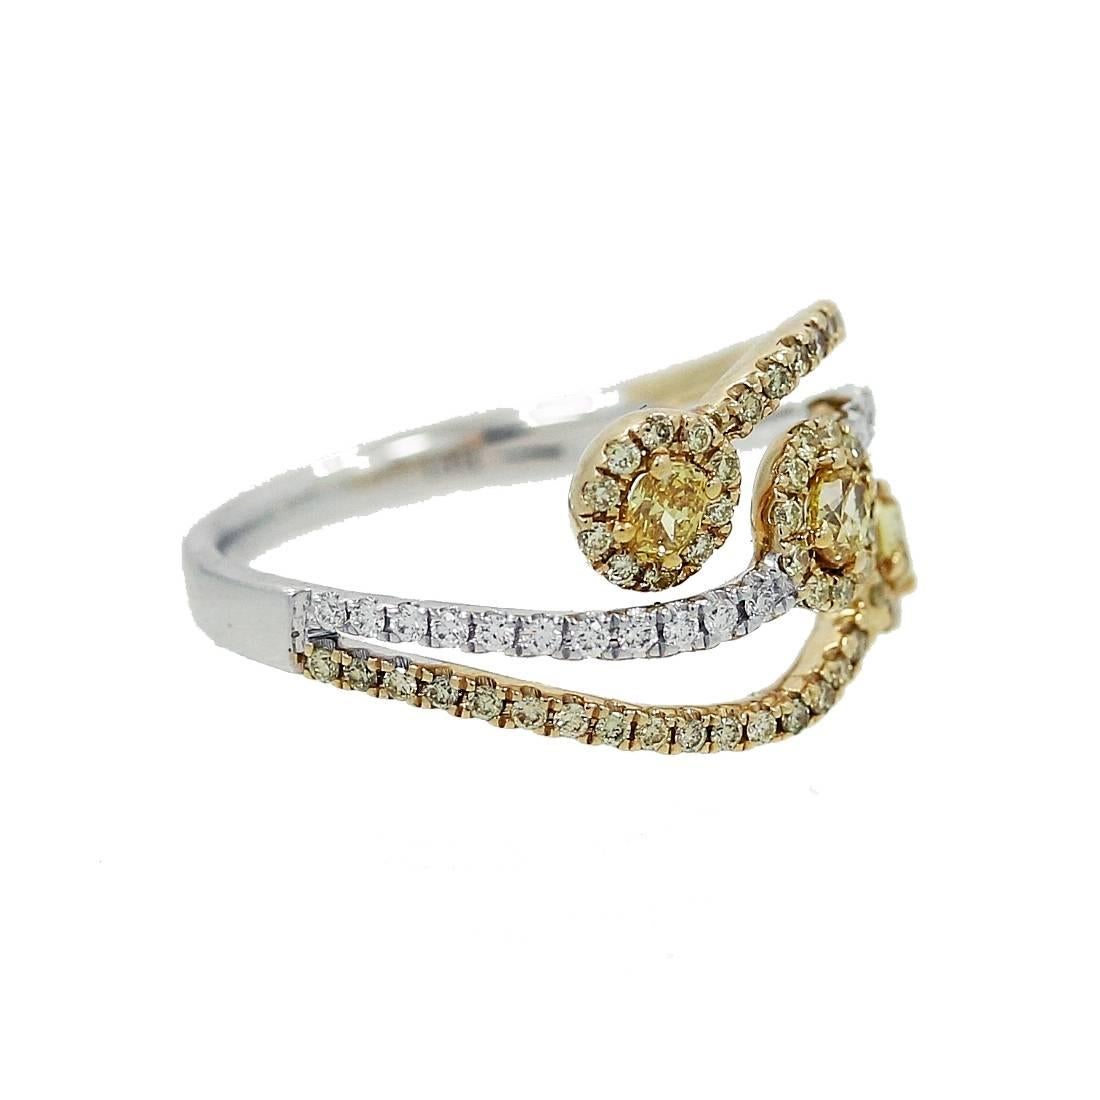 White and Yellow Gold Ring with 3 Oval Fancy Yellow Diamonds equal to .32 carats and Round Brilliant Yellow Diamonds equal to .32 carats. The ring is a size 7 but can be sized upon request.